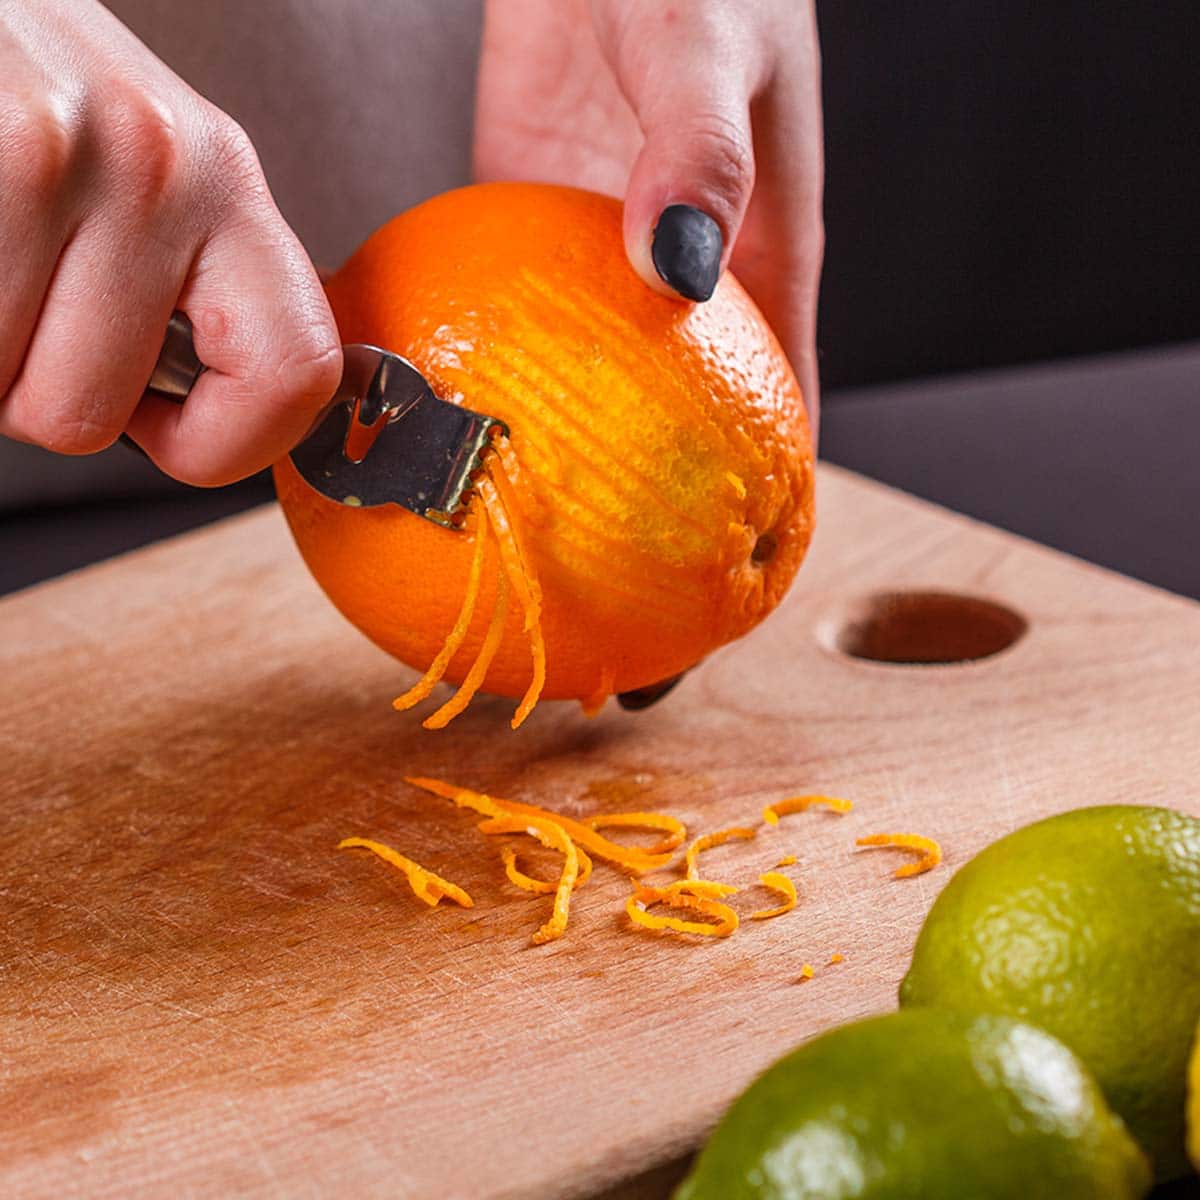 Now and again, you can get caught without one just when you discover that orange zest is a vital ingredient in a recipe you’re making.